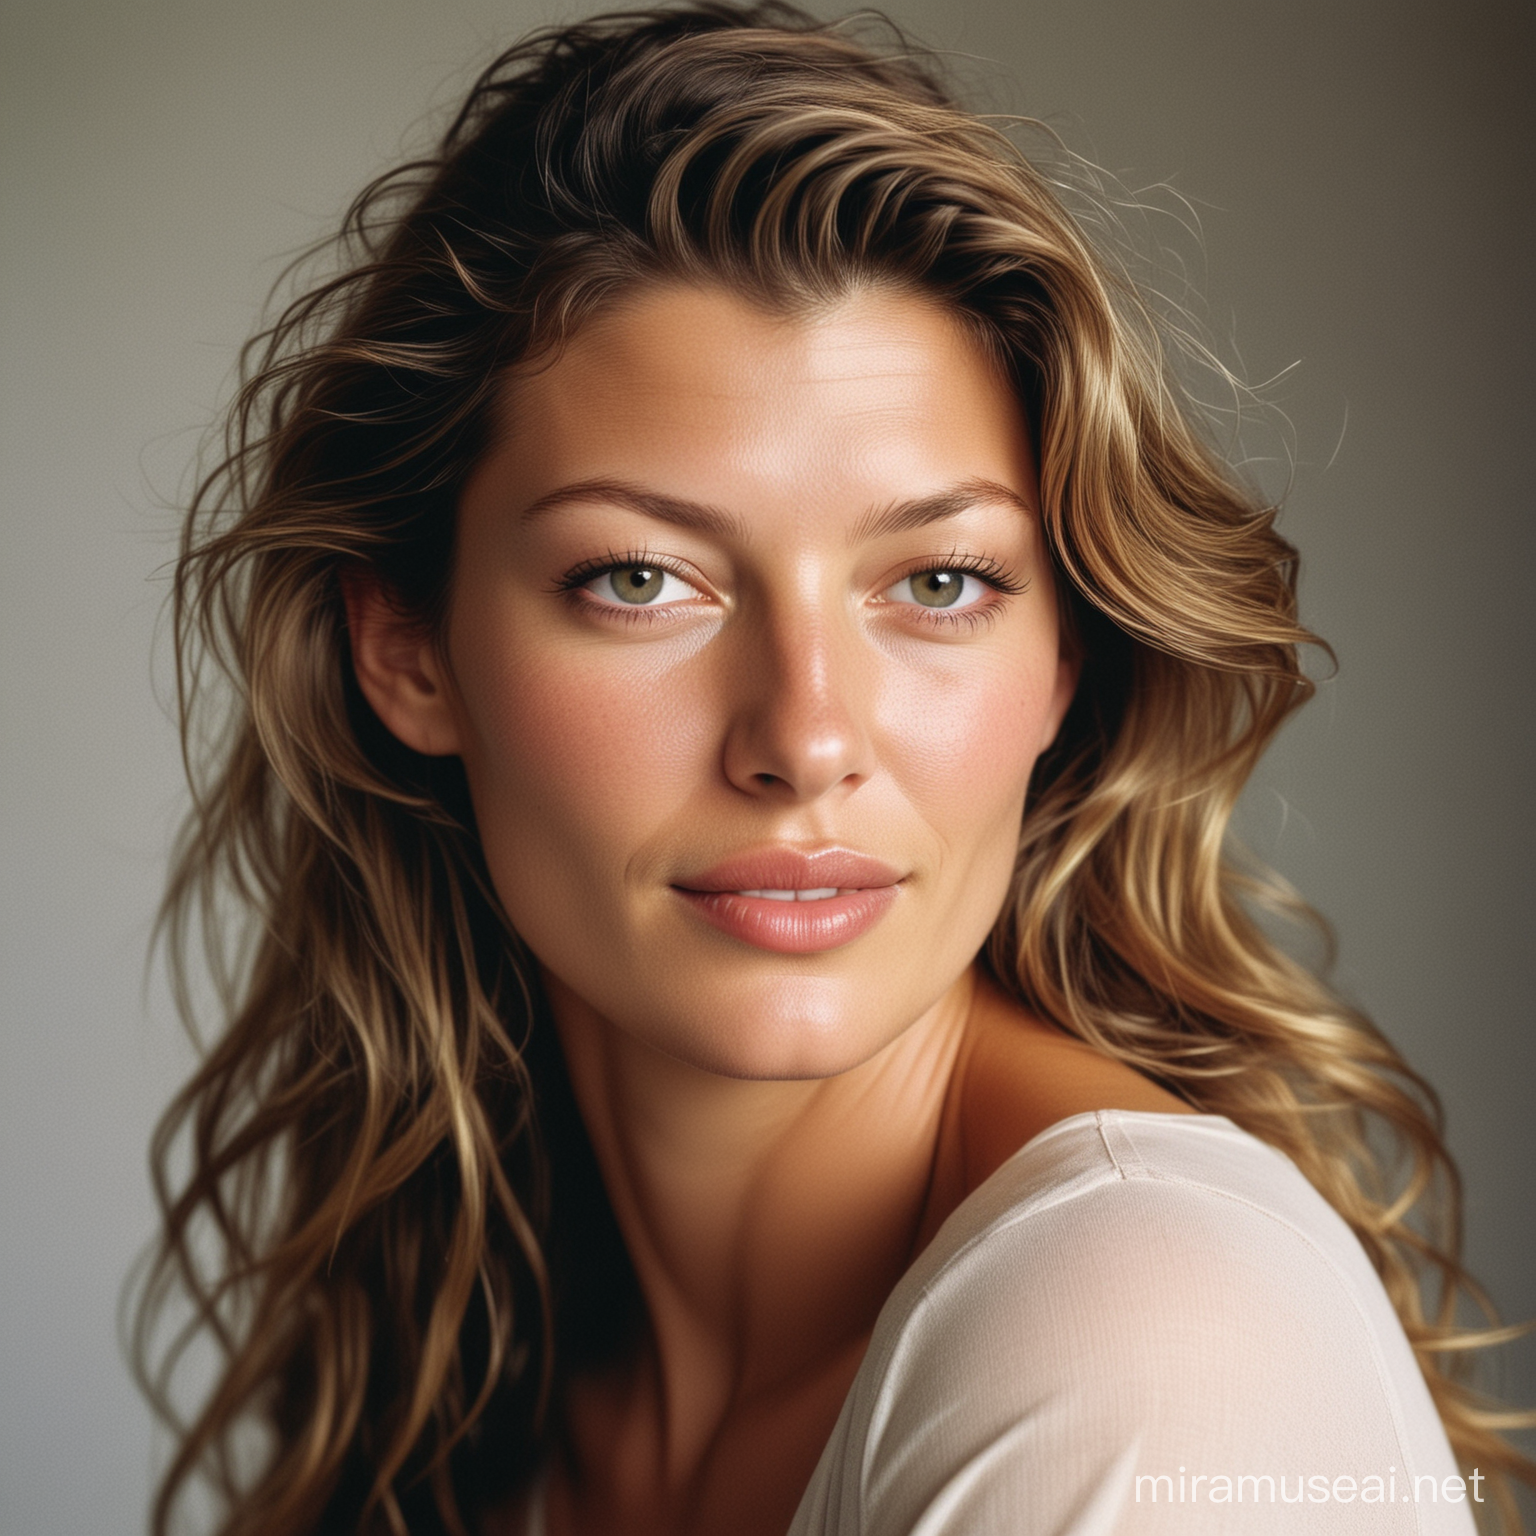 Gisele Bündchen Photo of the most beautiful woman in history, soft smirk, Portra 400